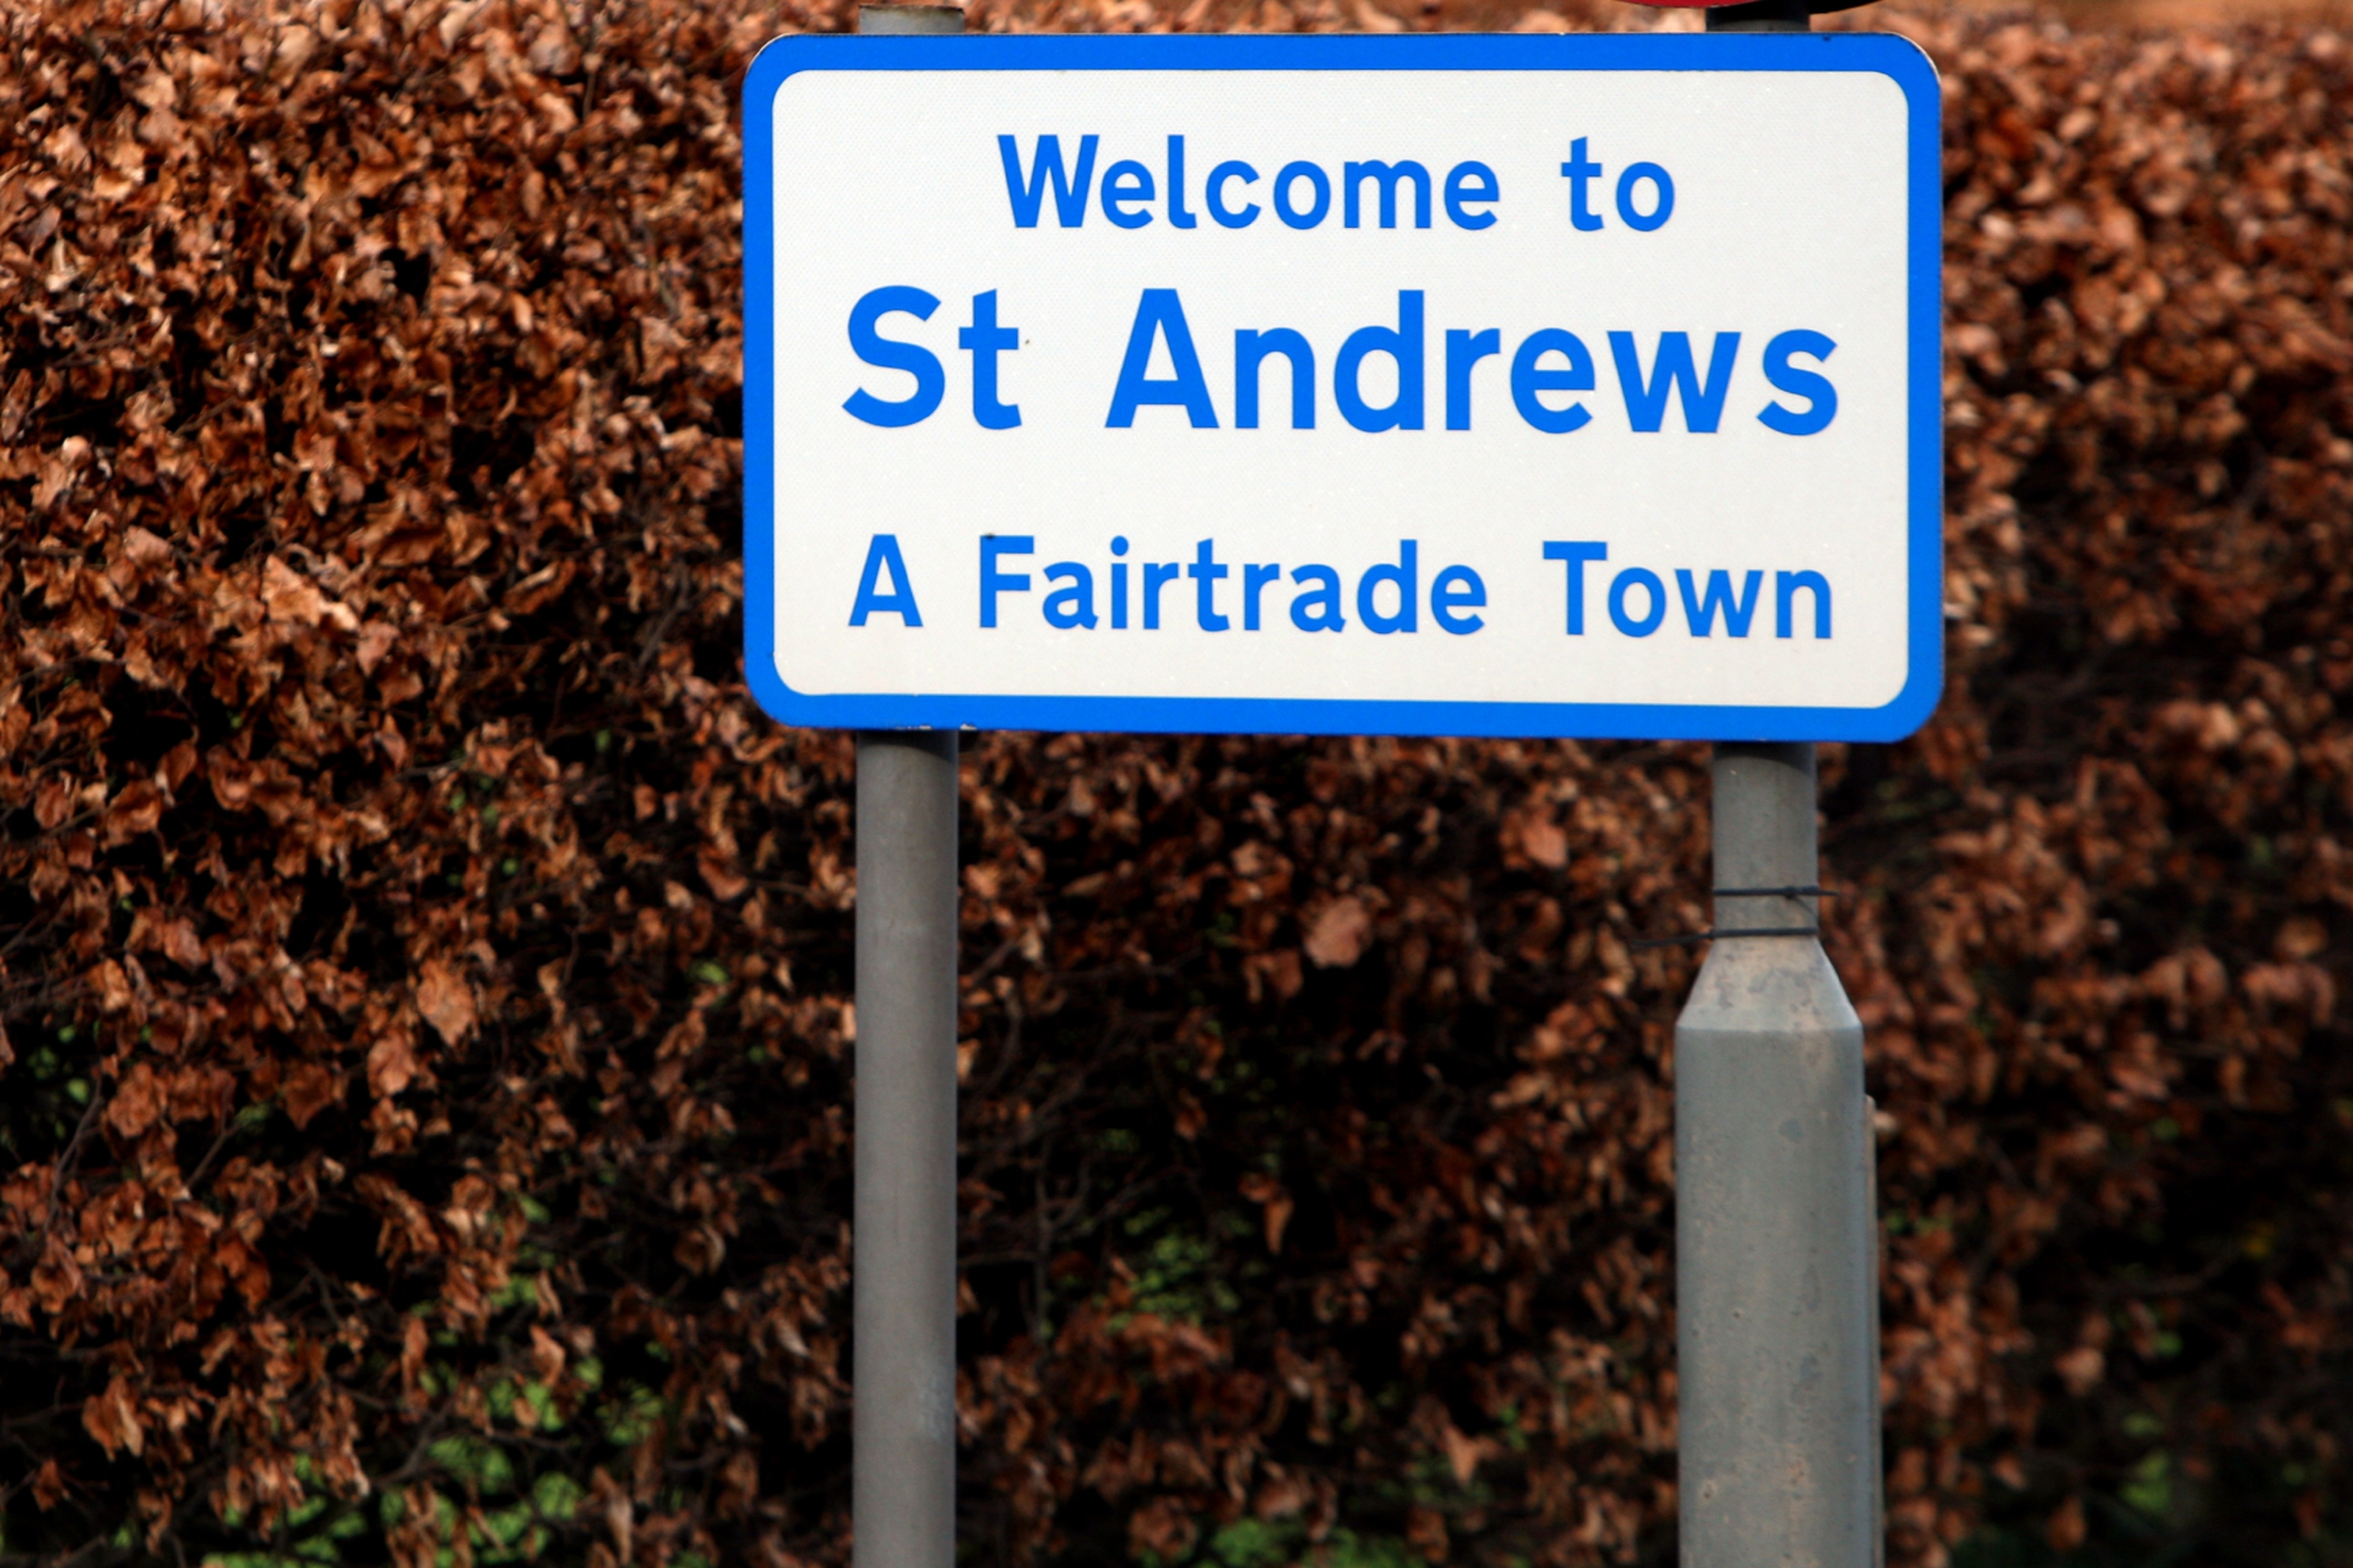 Visitors can explore the hidden markets of St Andrews